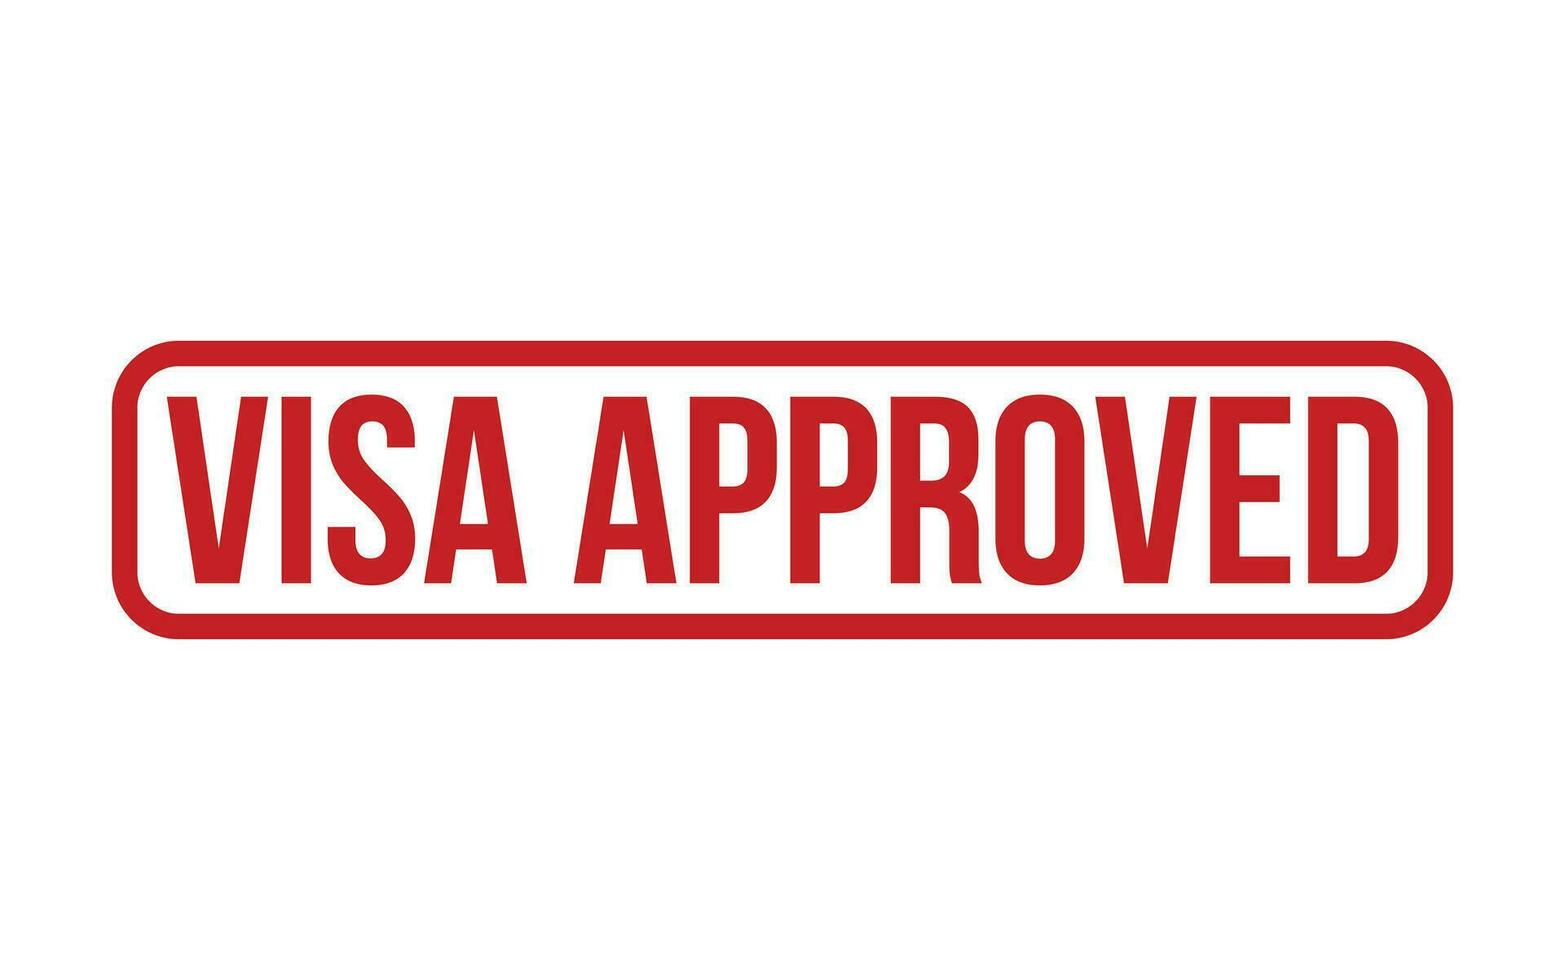 Red Visa Approved Rubber Stamp Seal Vector